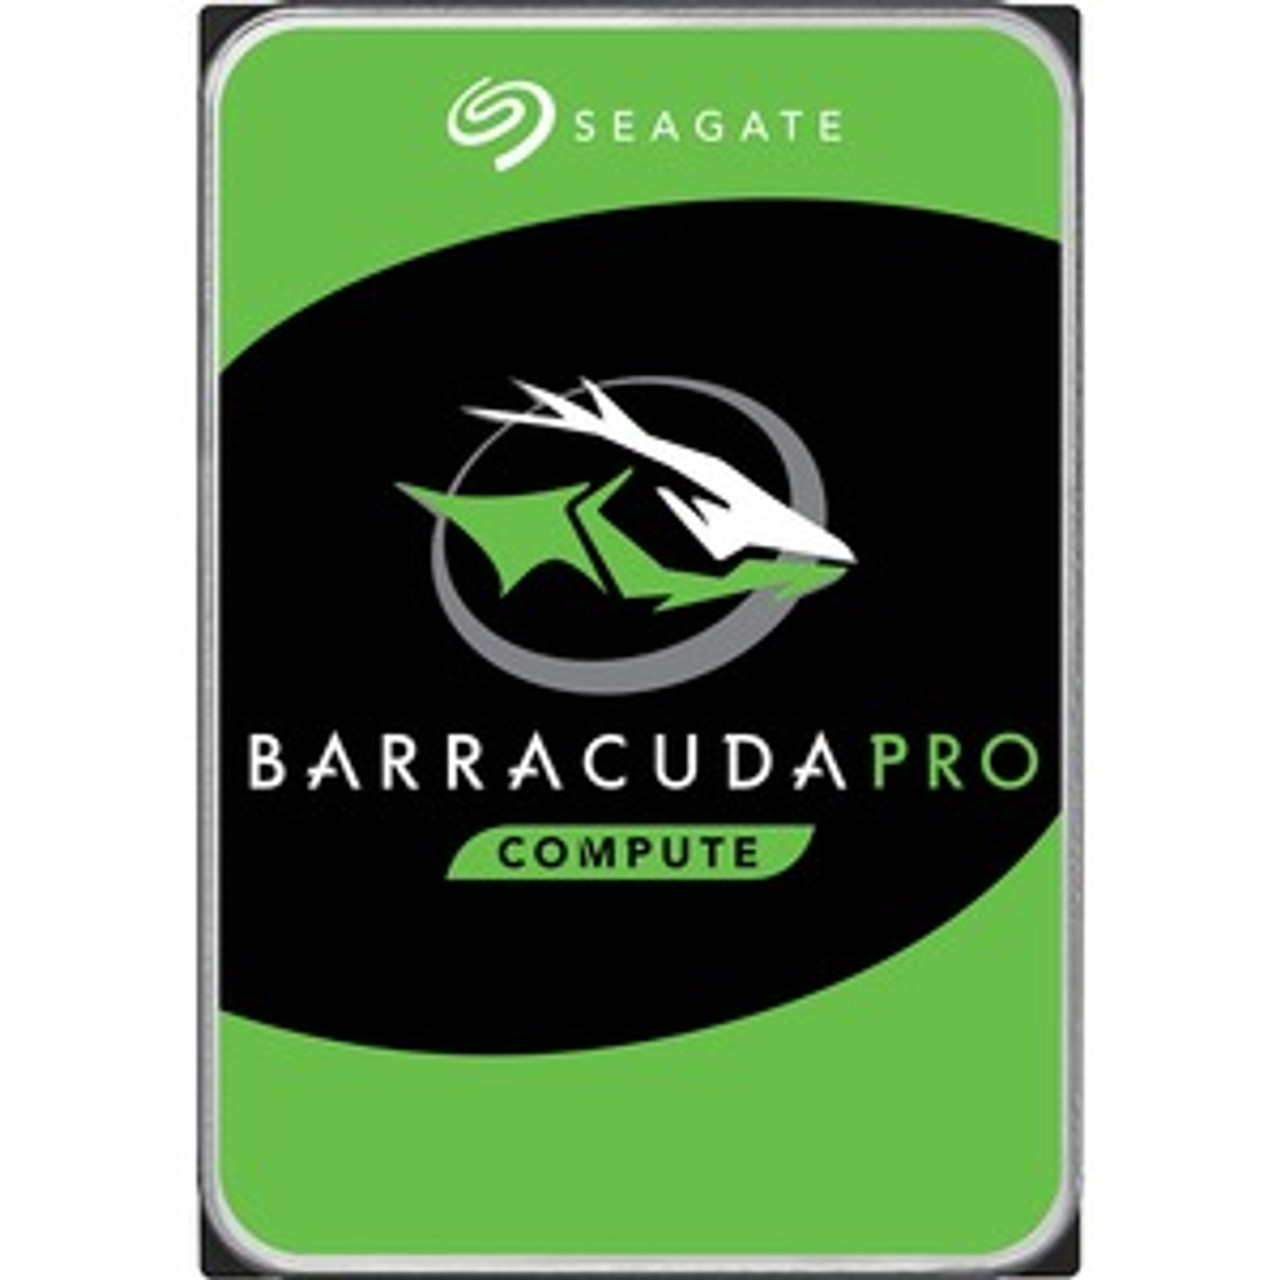 ST1000LM050 Seagate Barracuda Pro 1TB 7200RPM SATA 6Gbps 128MB Cache (SED-FIPS 140-2) 2.5-inch Internal Hard Drive